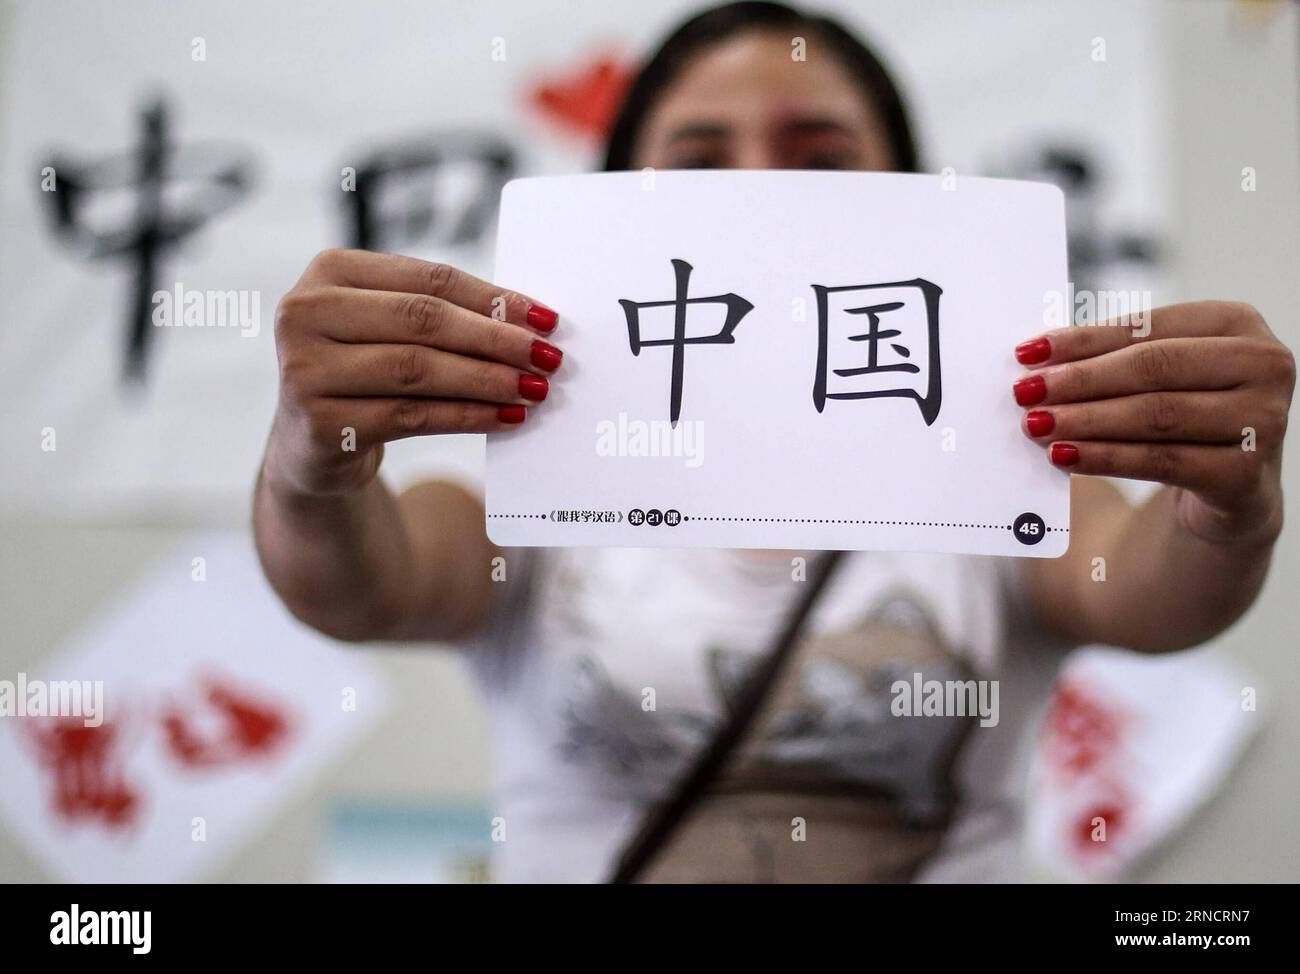 SAO PAULO (BRAZIL), April 18, 2016 -- Image taken on April 18, 2016 shows a student holding a card with Chinese characters meaning China during a Chinese language class at CEU Meninos municipal public school in Sao Paulo, Brasil. Chinese classes at CEU Meninos school are promoted in partnership between the school and the Confucius Intitute. Currently 125 students from six to fourteen years old attend the classes in CEU Meninos . The Day of Chinese Language is celebrated annually on April 20, aiming to promote multilingualism, cultural diversity and equal usage of the official languages of the Stock Photo